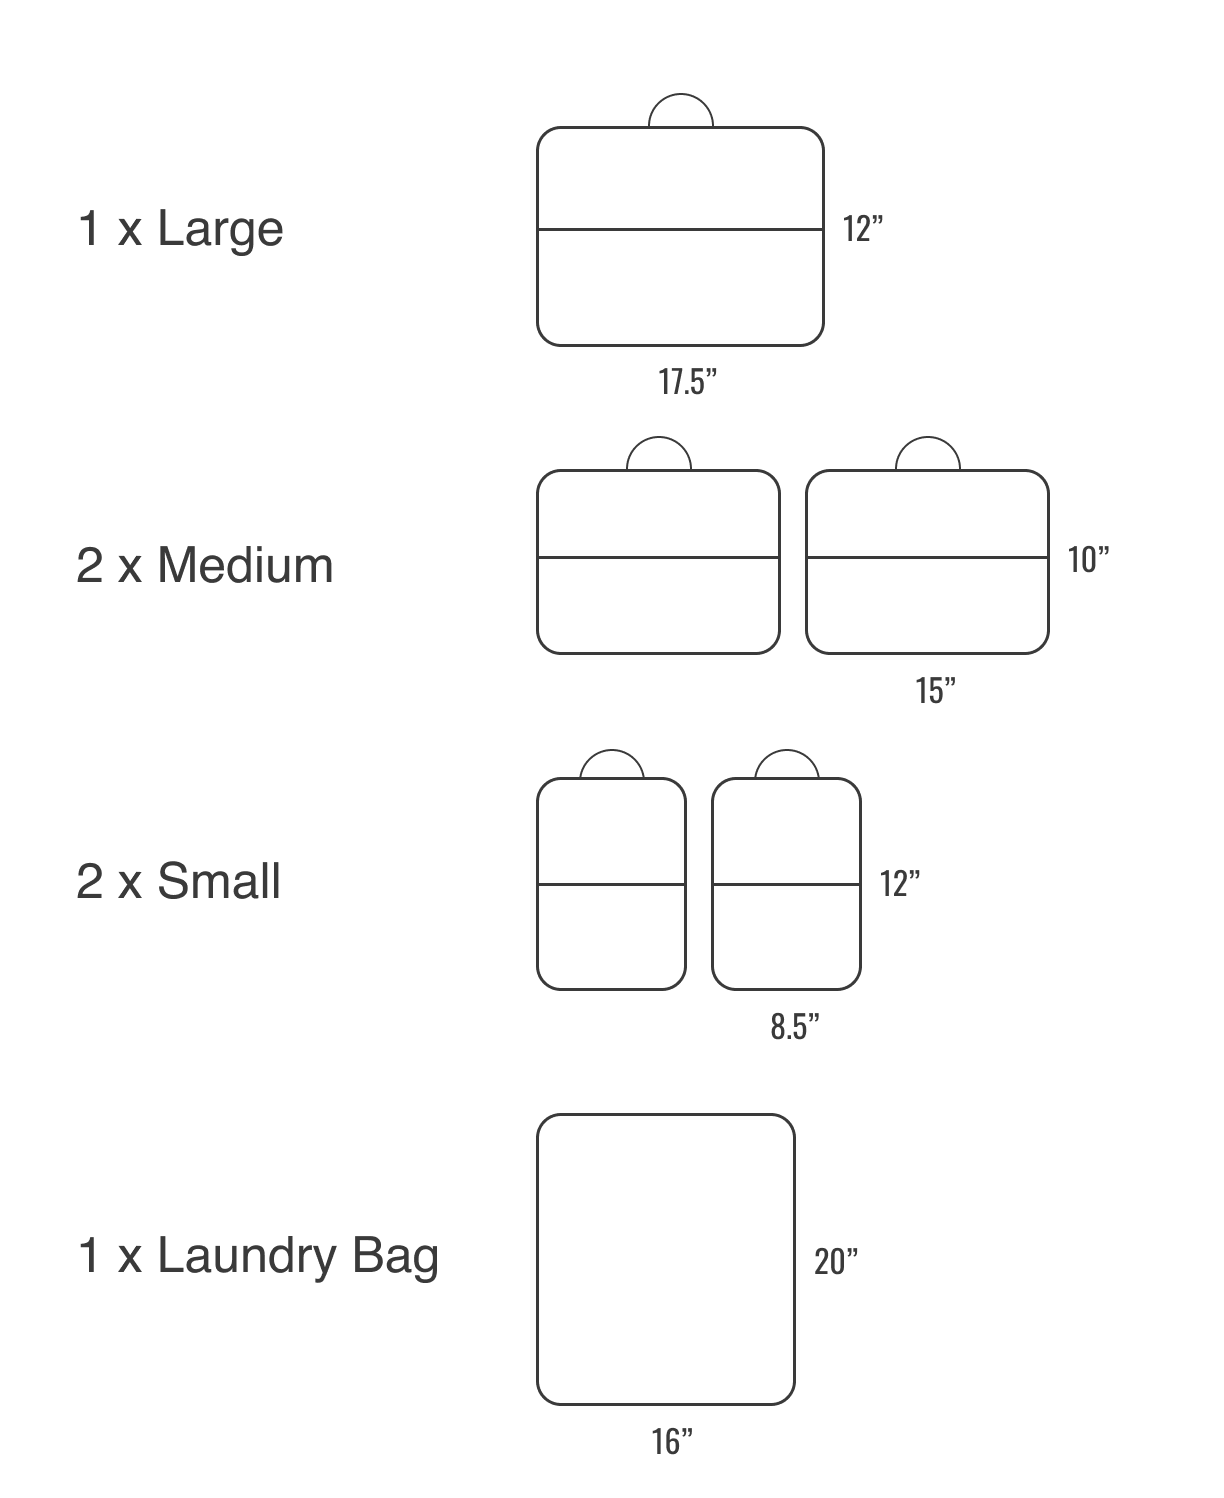 Dimensions of the five (5) Brixley Bags Packing Cubes - One (1) Large: H12"xW17.5", Two (2) Medium: H10"xW15", Two (2) Small H12"xW8.5" and One (1) Laundry Bag: H20"xW16"